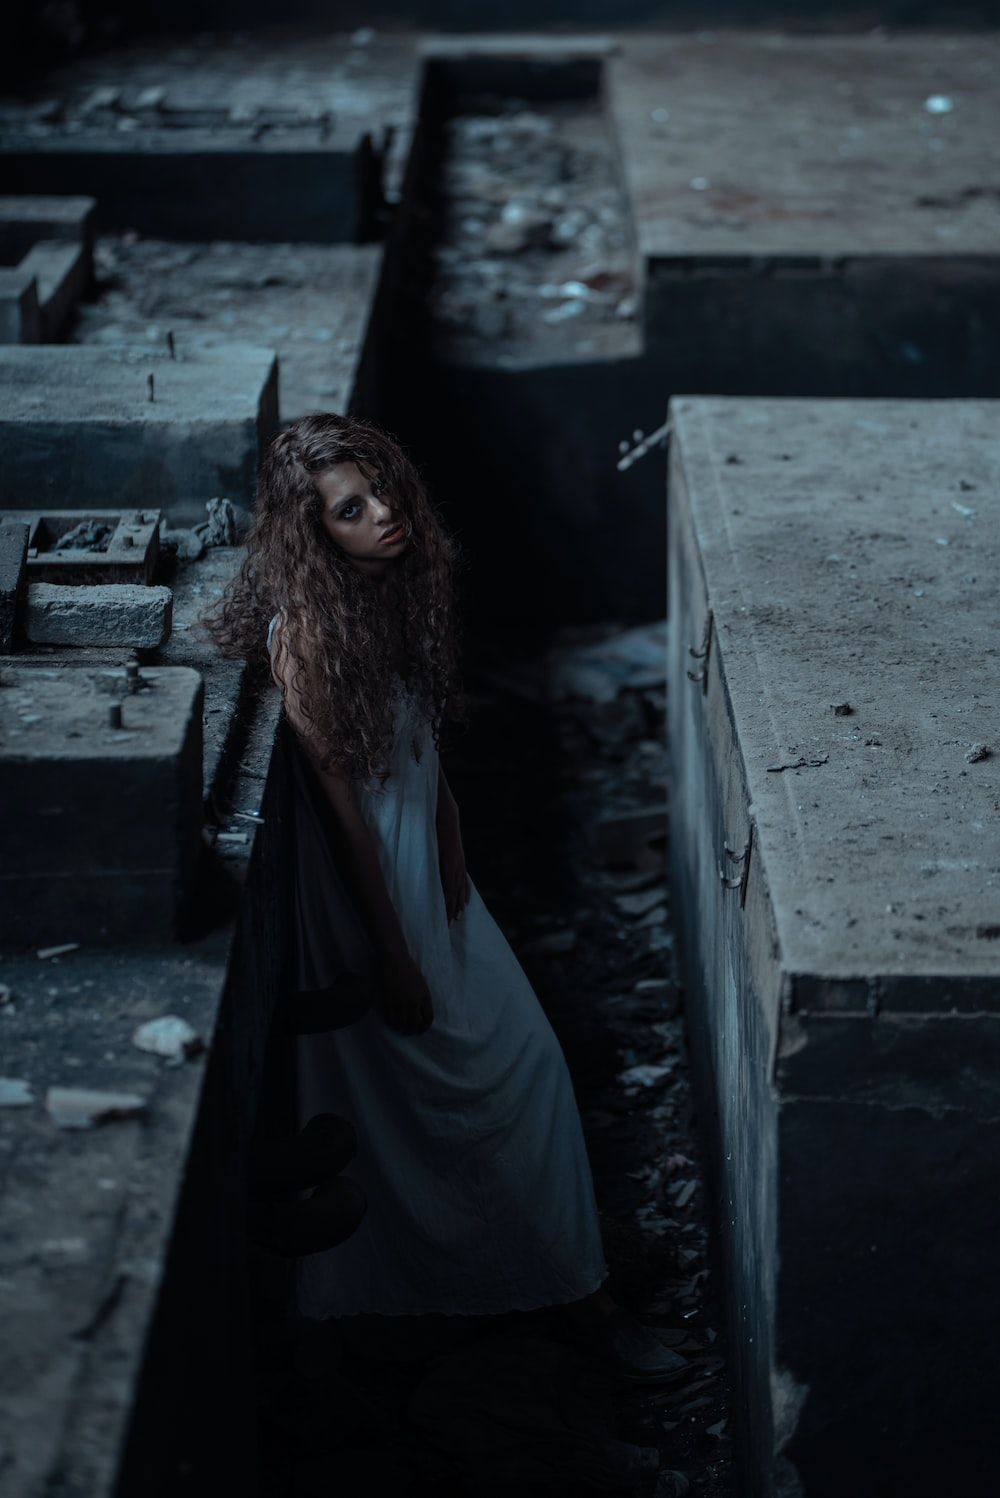 A woman with long hair in a white dress standing in a dark alleyway - Vampire